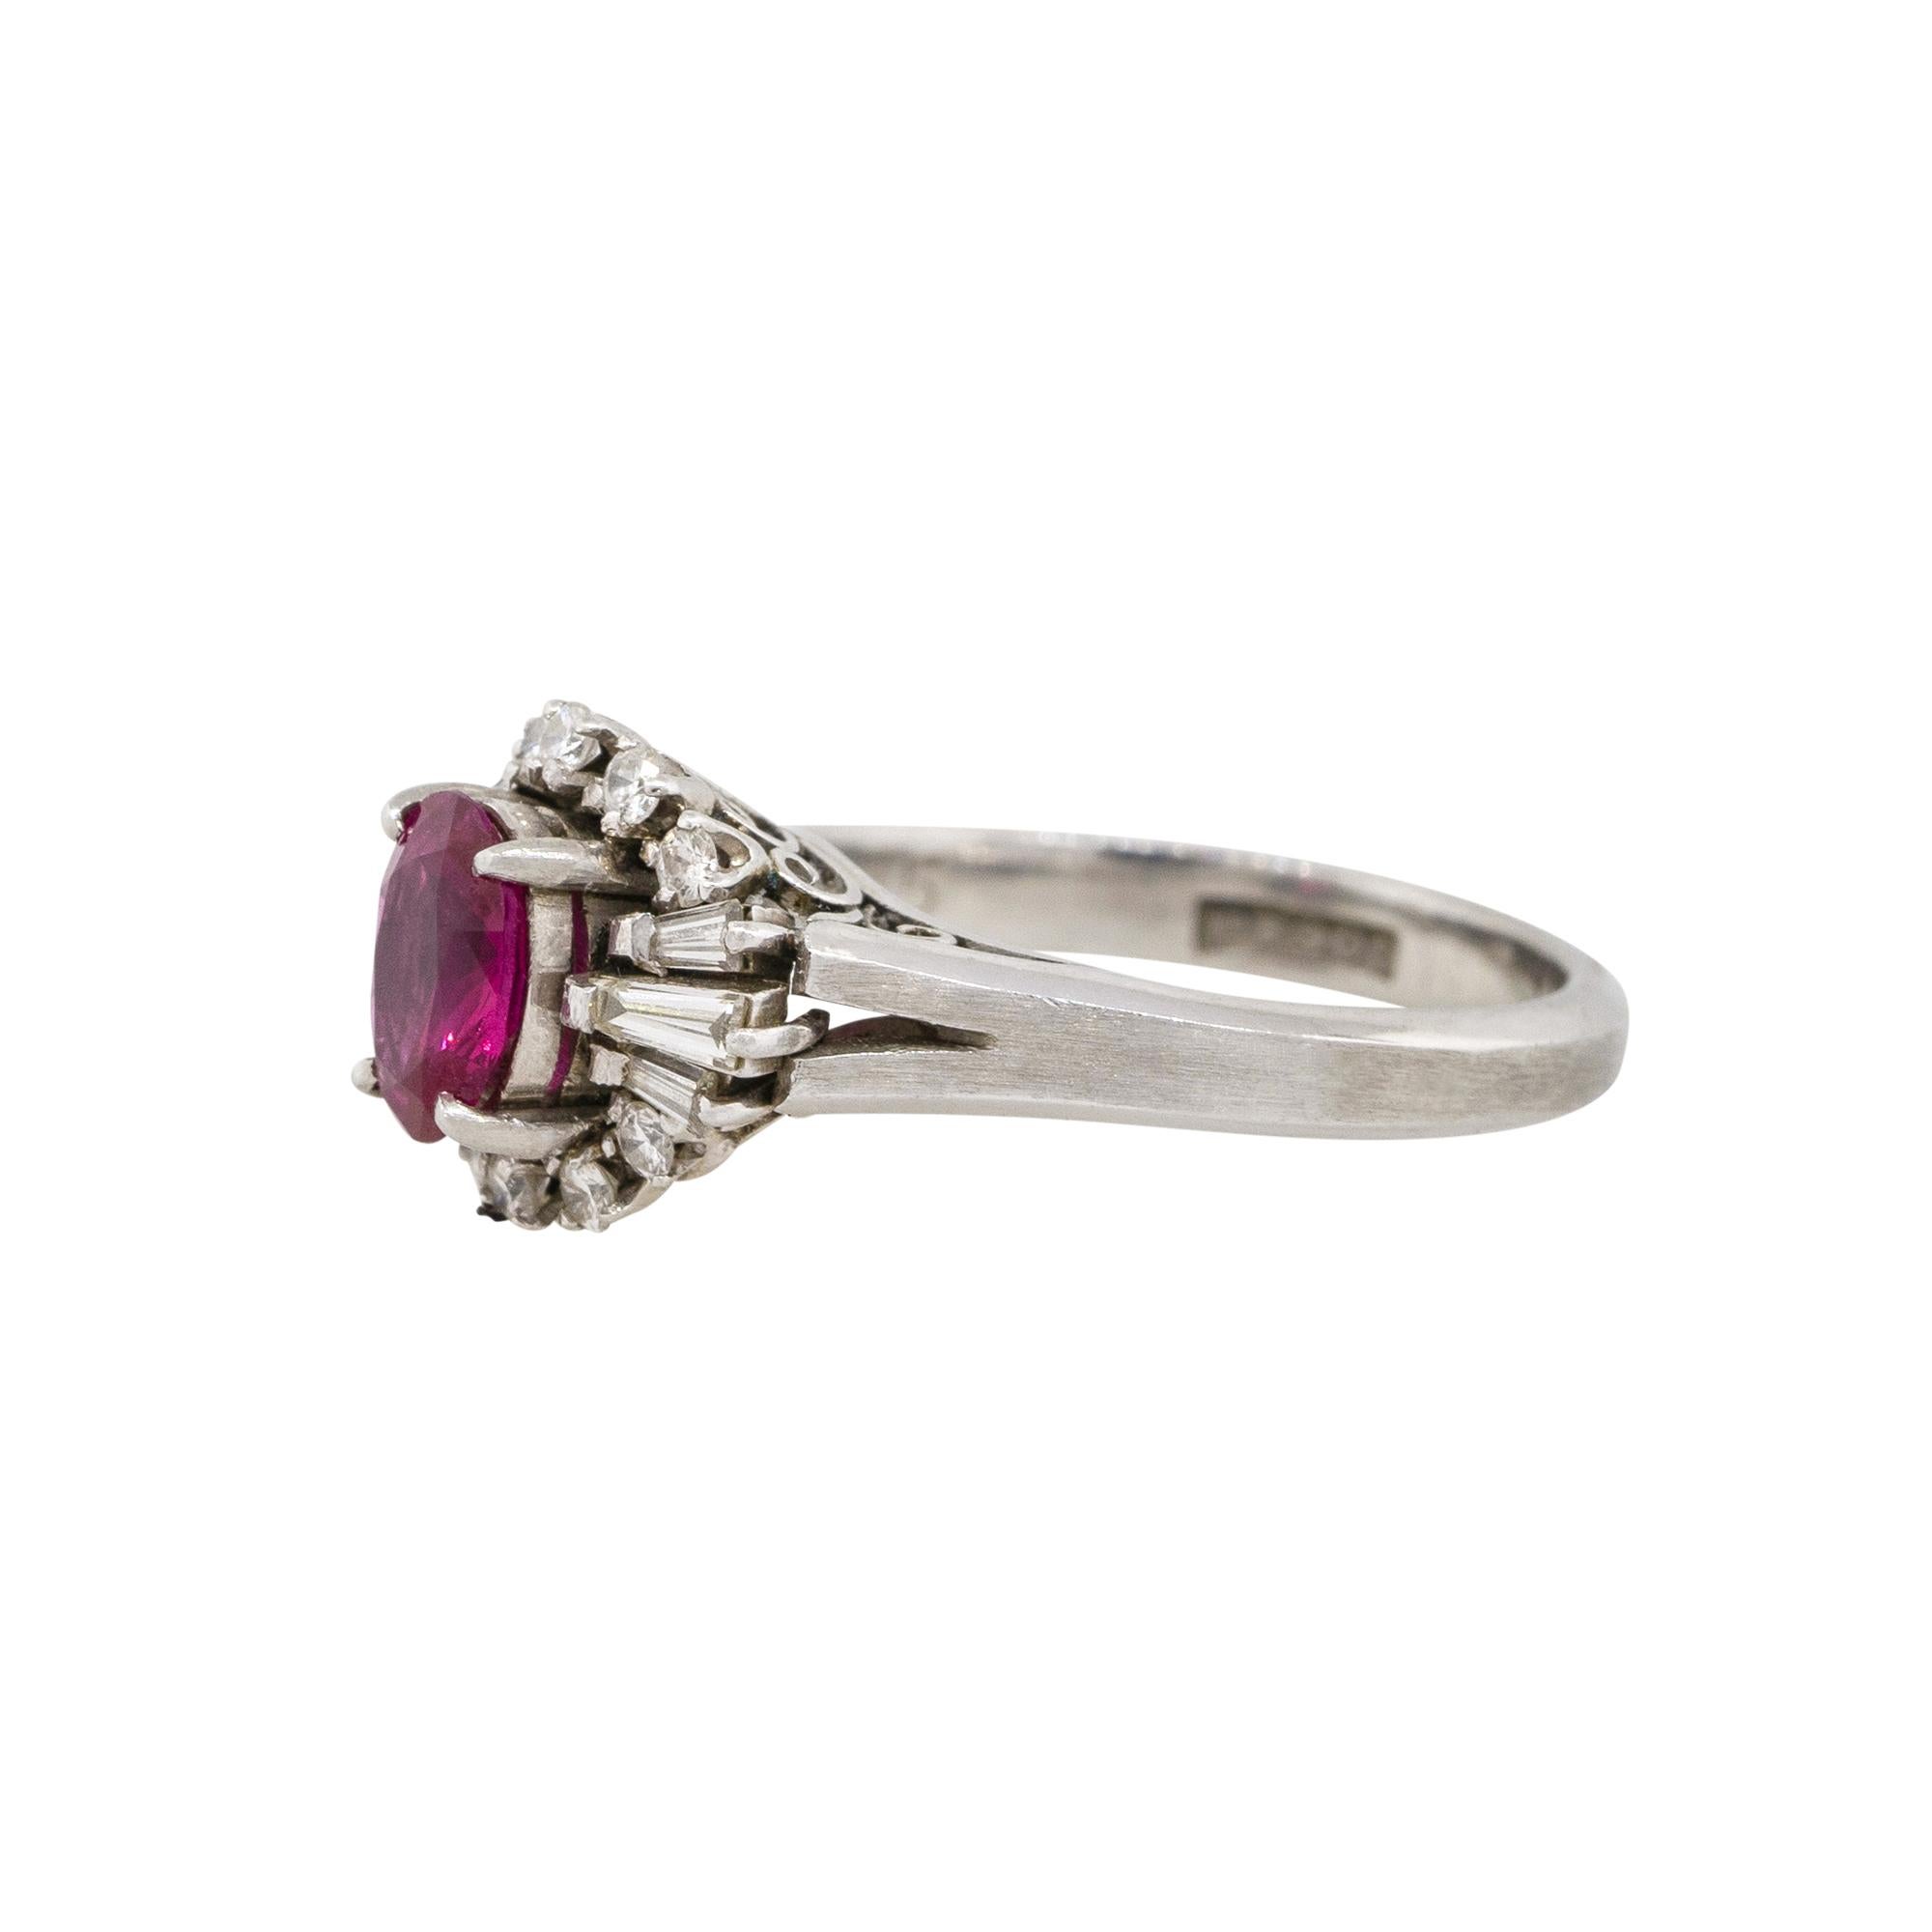 Material: Platinum
Gemstone details: Approx. 0.75 oval cut Ruby gemstone
Diamond details: Approx. 0.36ctw of round and baguette cut diamonds. Diamonds are G/H in color and VS in clarity
Ring Size: 4.75  
Ring Measurements: 0.60